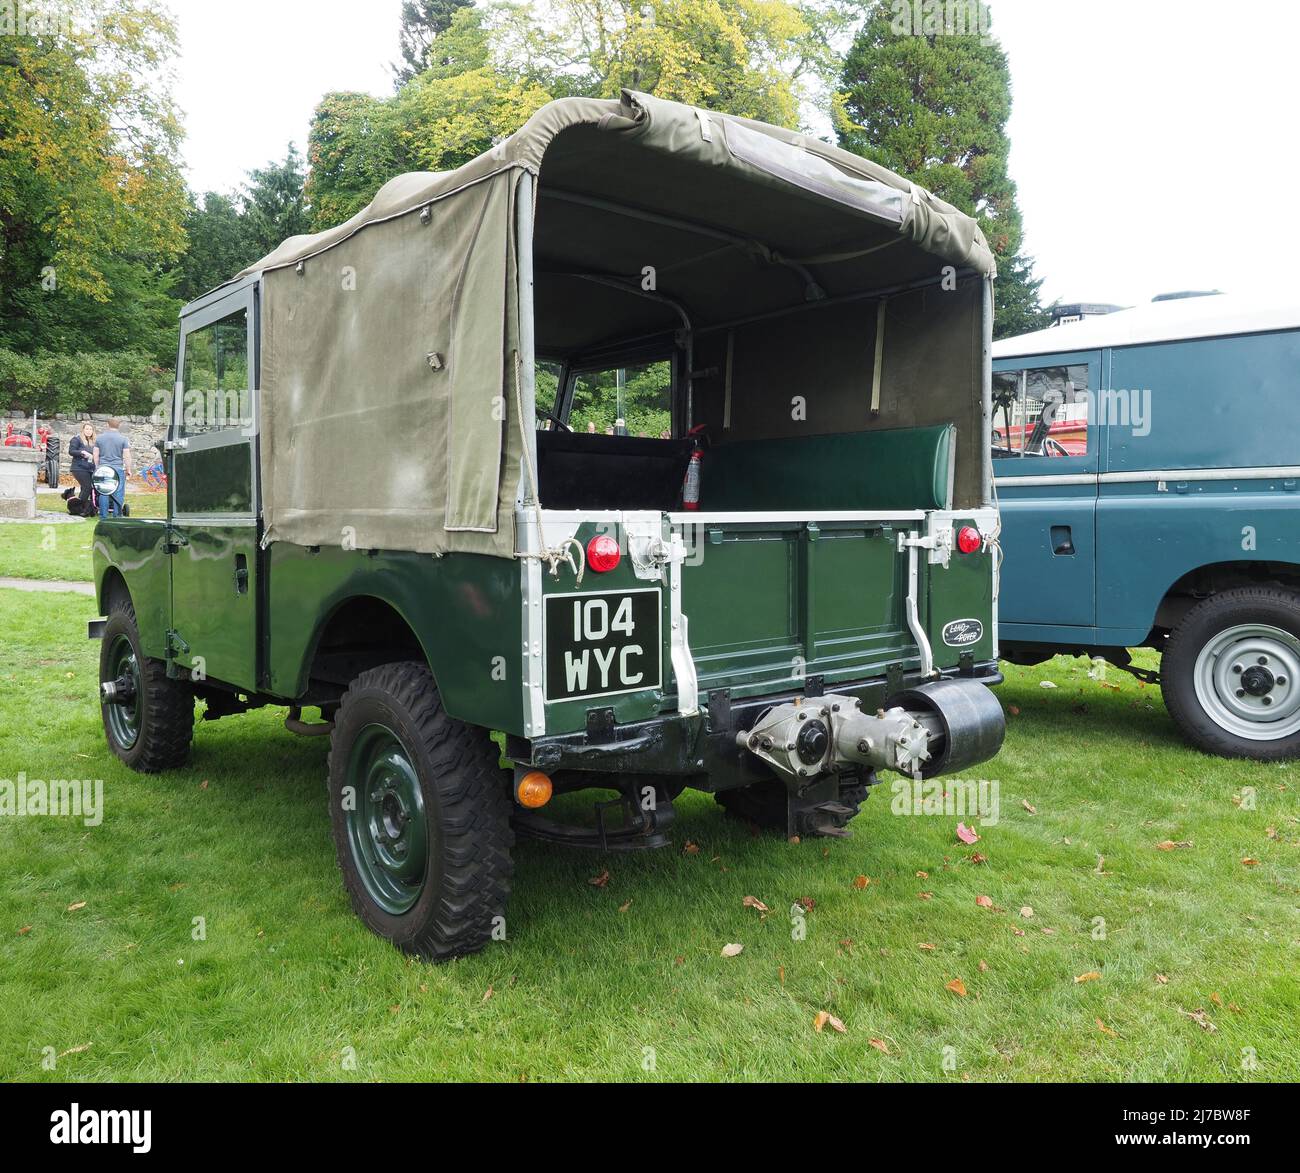 Rear view of a dark green Series I short wheel base, Land Rover with soft top canvas tilt. This also has the rear power take off, PTO, attachment. Stock Photo